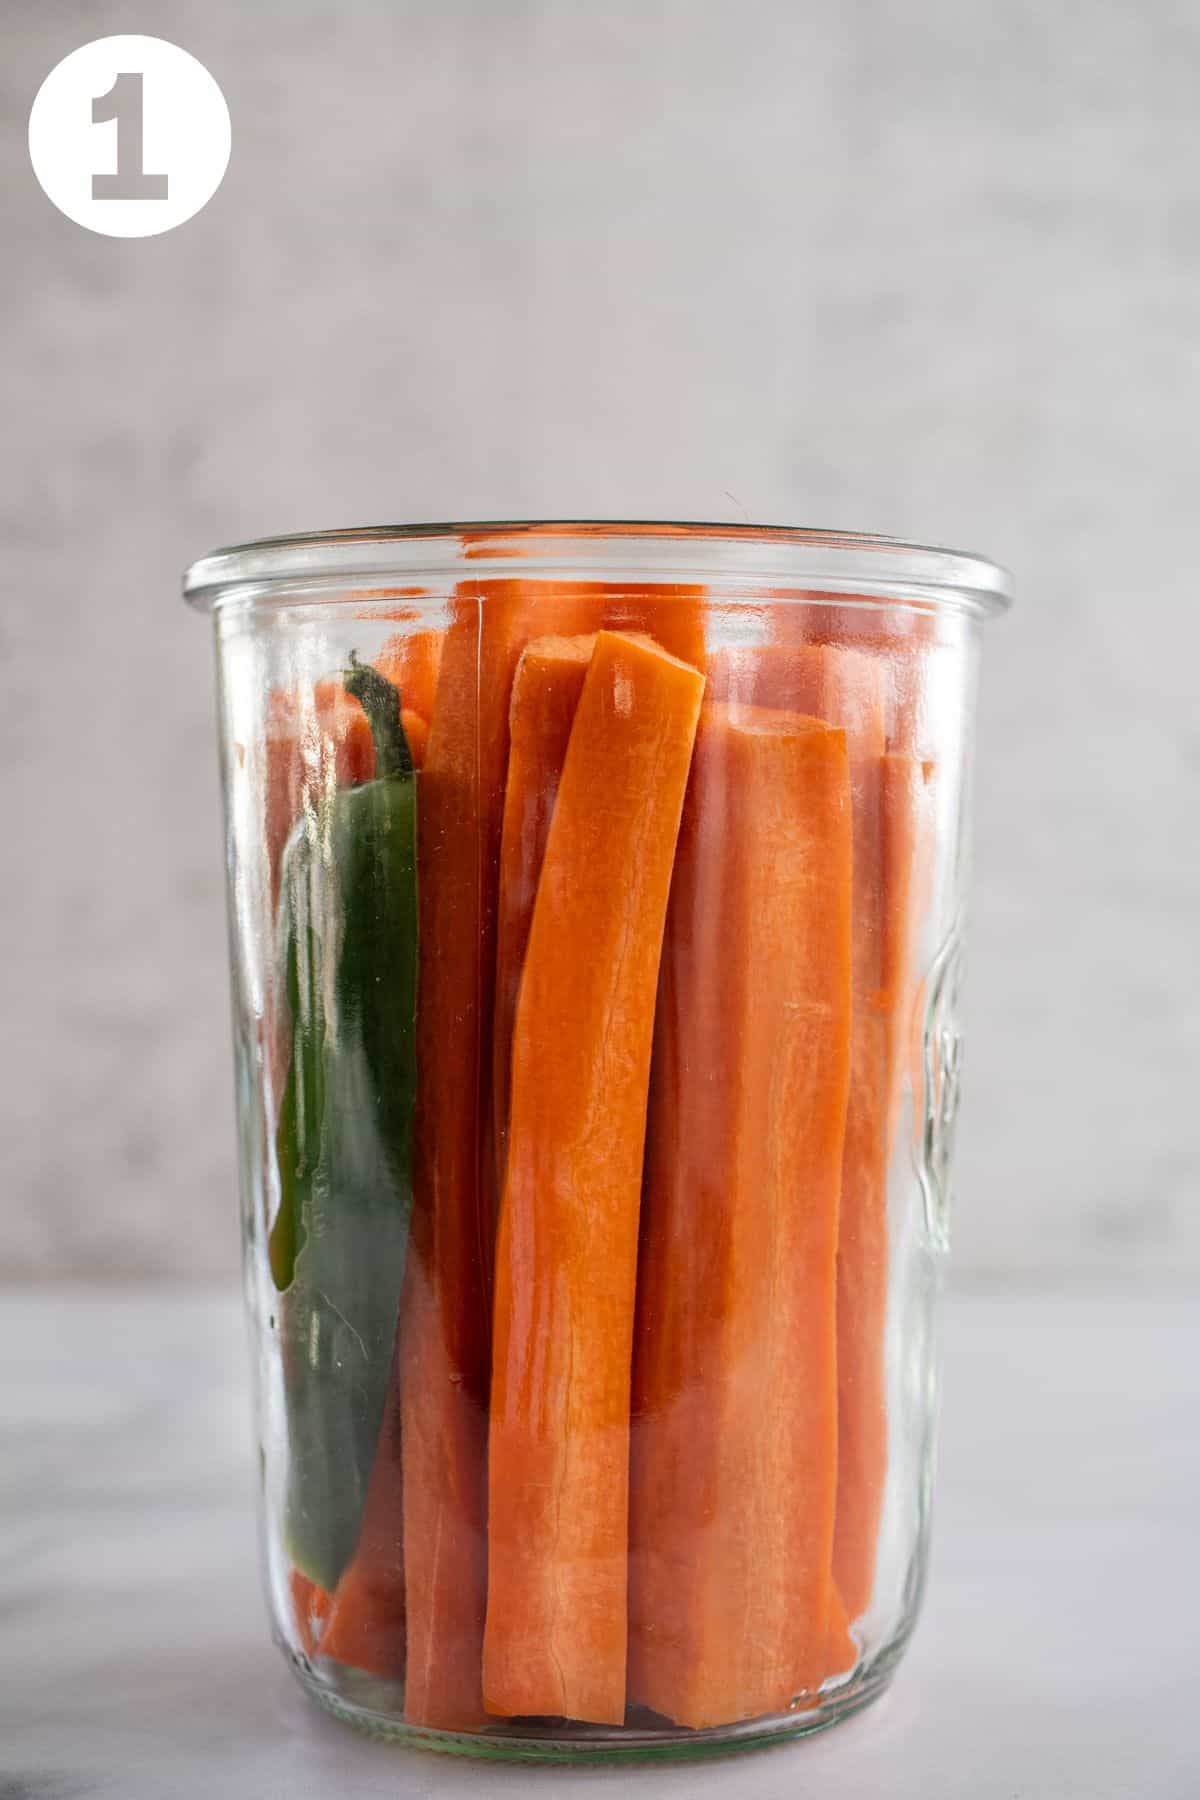 Carrot sticks in a glass jar. Labeled with a 